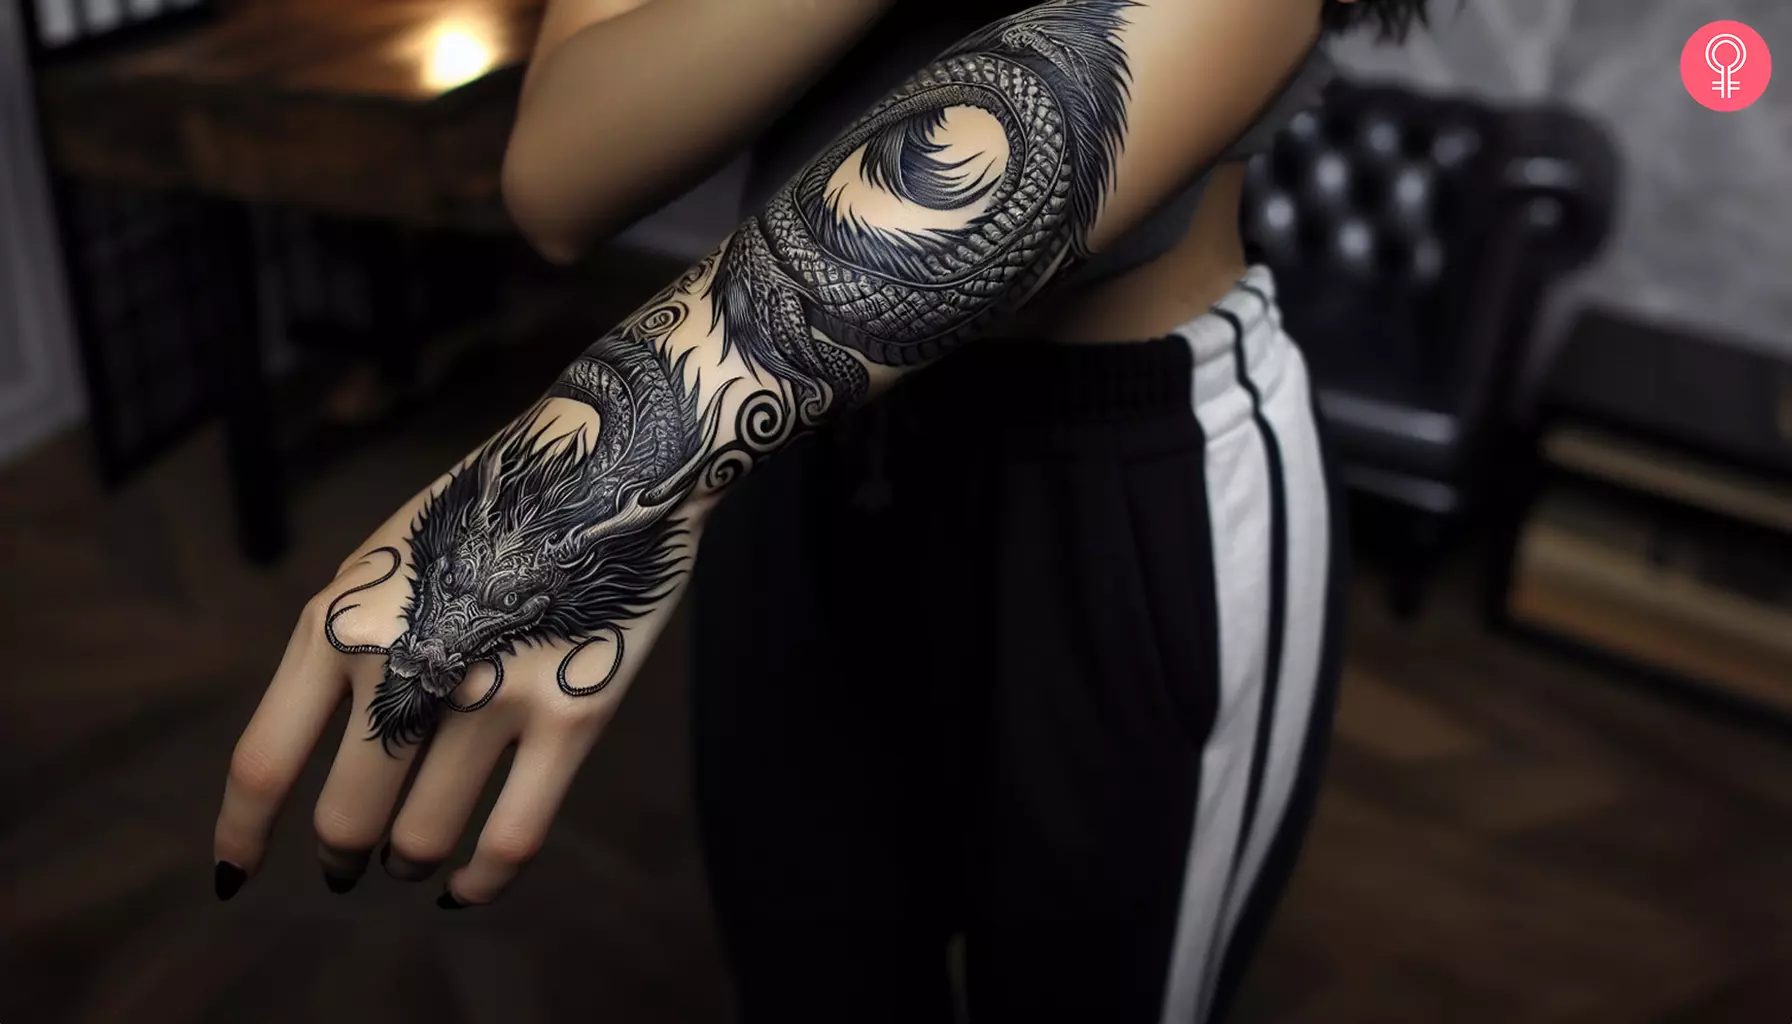 A detailed black dragon tattoo on the forearm